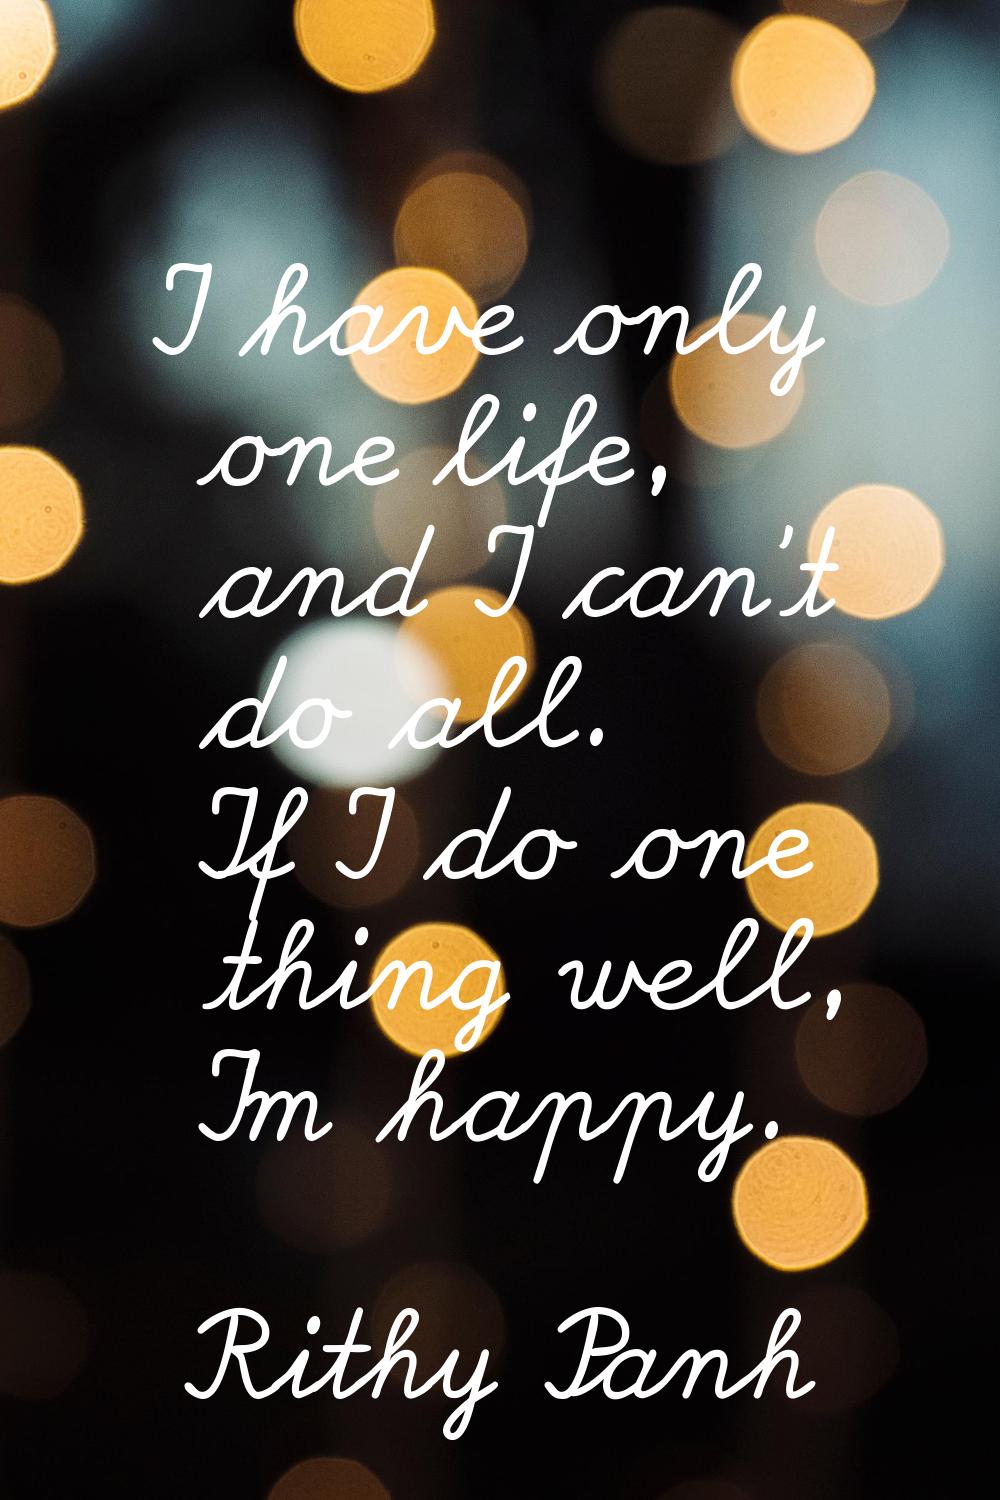 I have only one life, and I can't do all. If I do one thing well, I'm happy.